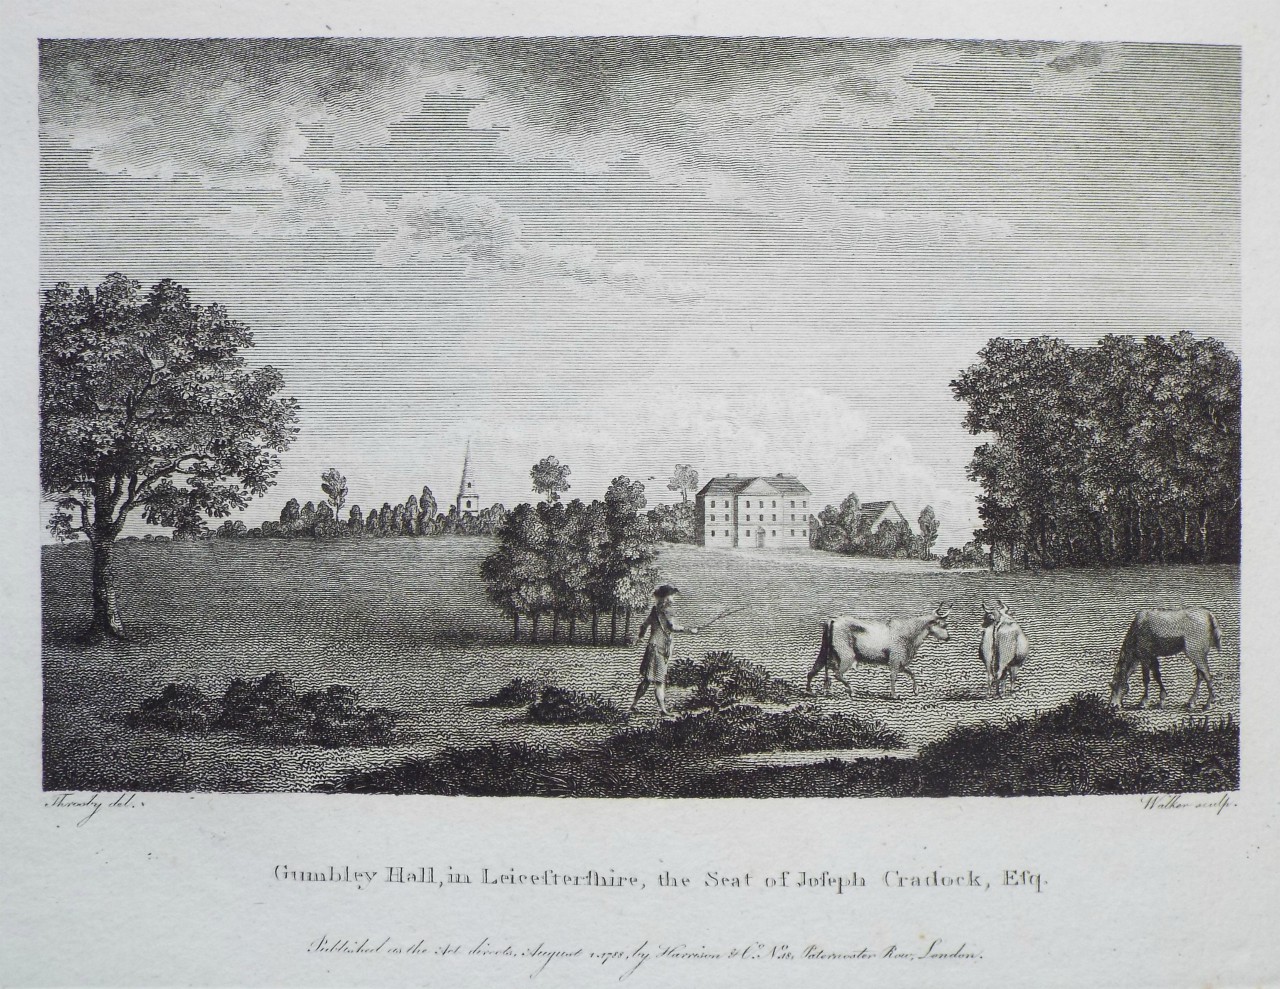 Print - Gumbley Hall, in Leicestershire, the Seat of Joseph Cradock, Esq. - 